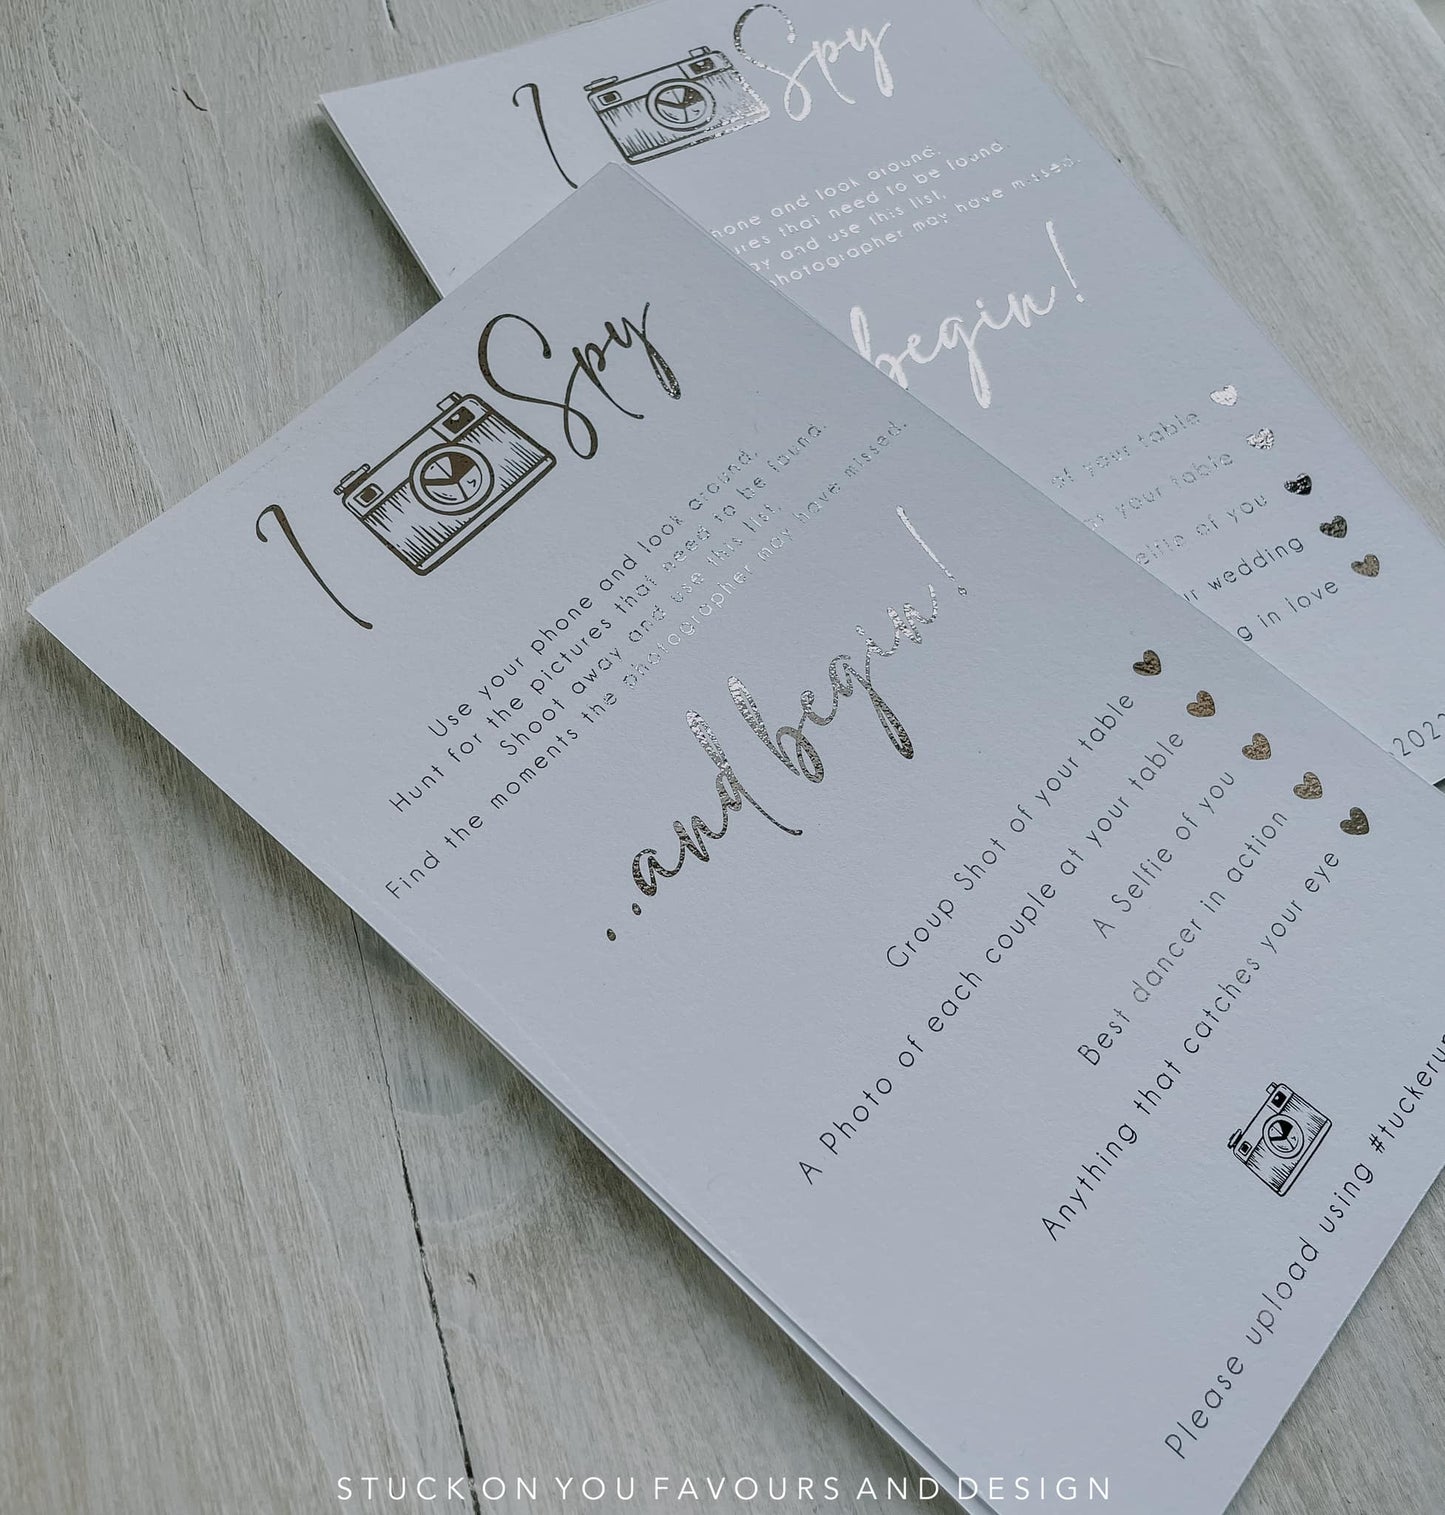 Wedding Game - Guest Photography Cards